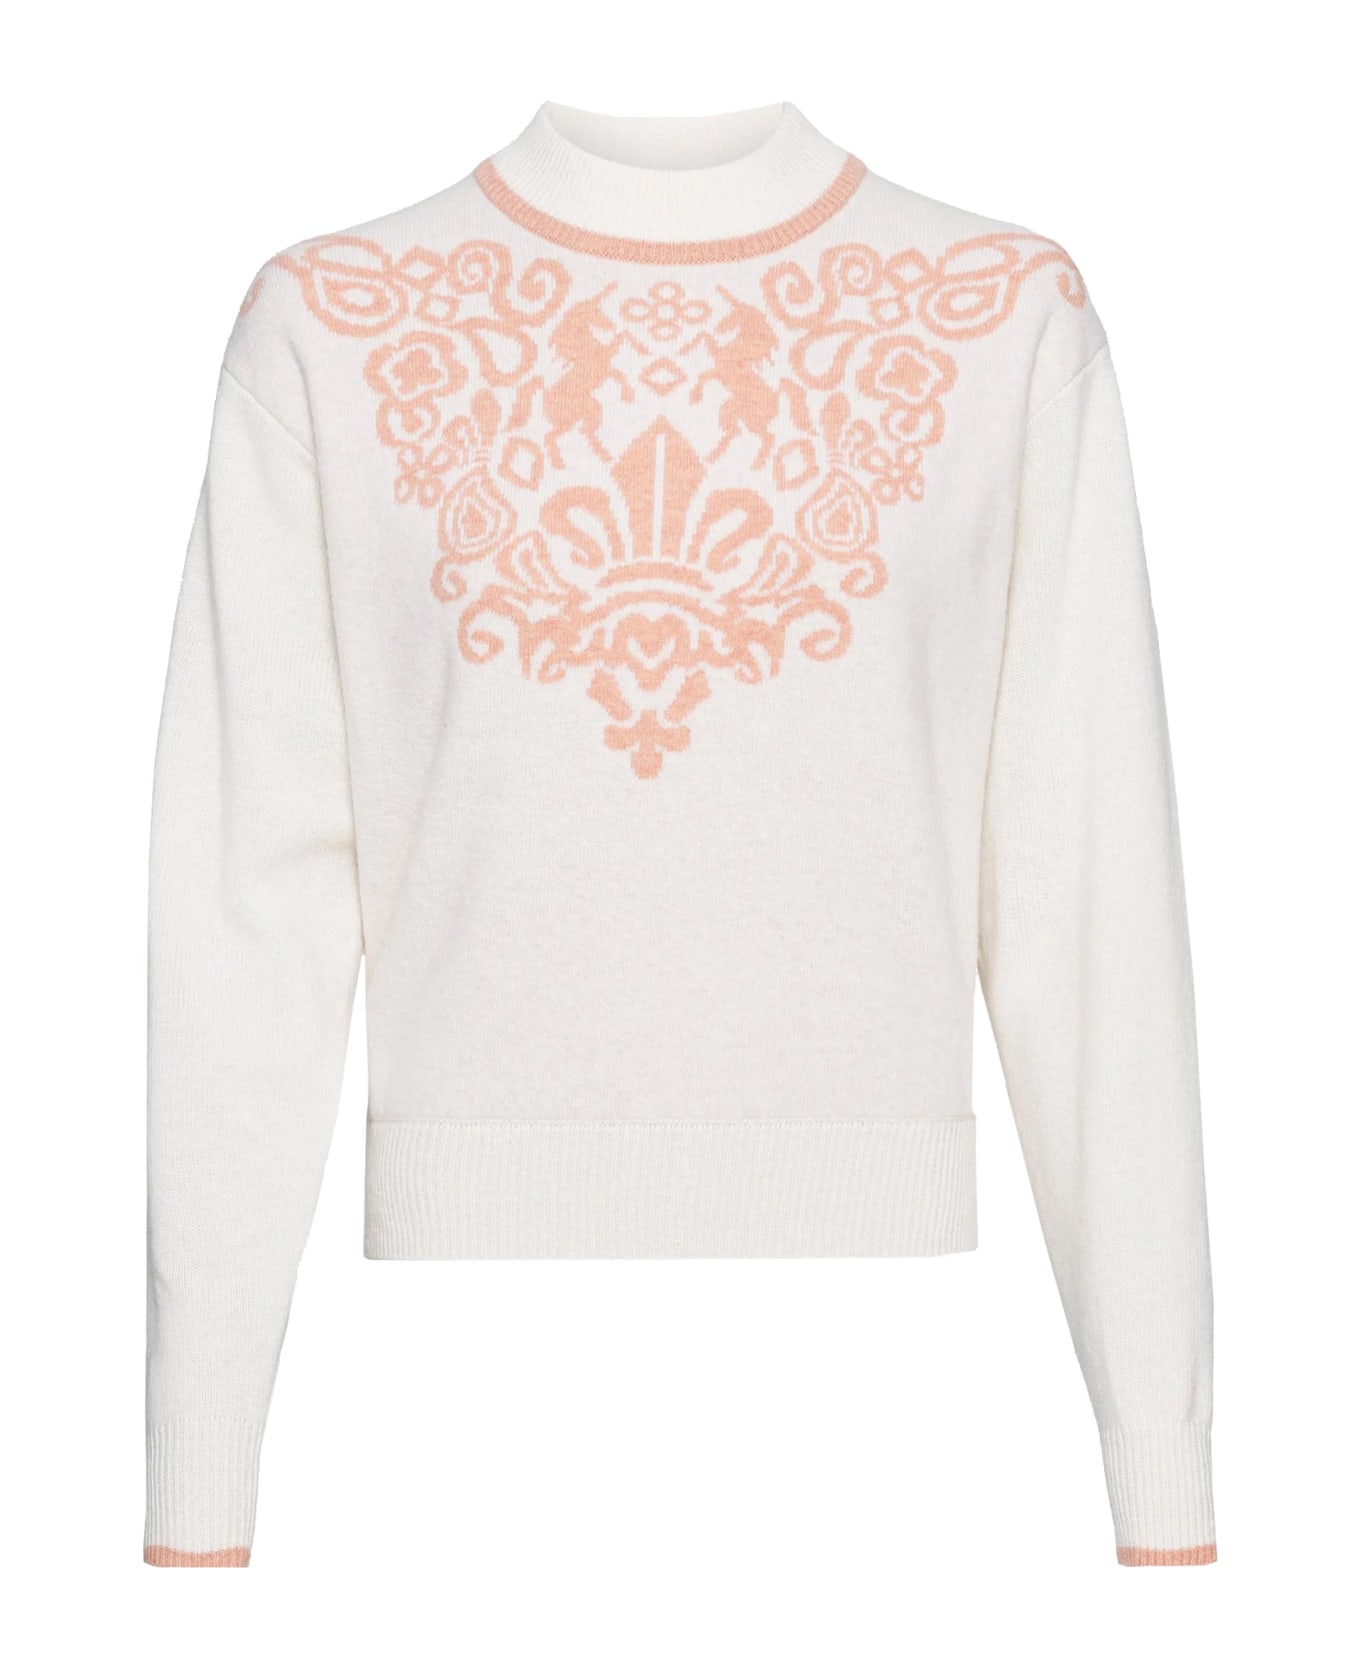 See by Chloé Intarsia Knit - Beige